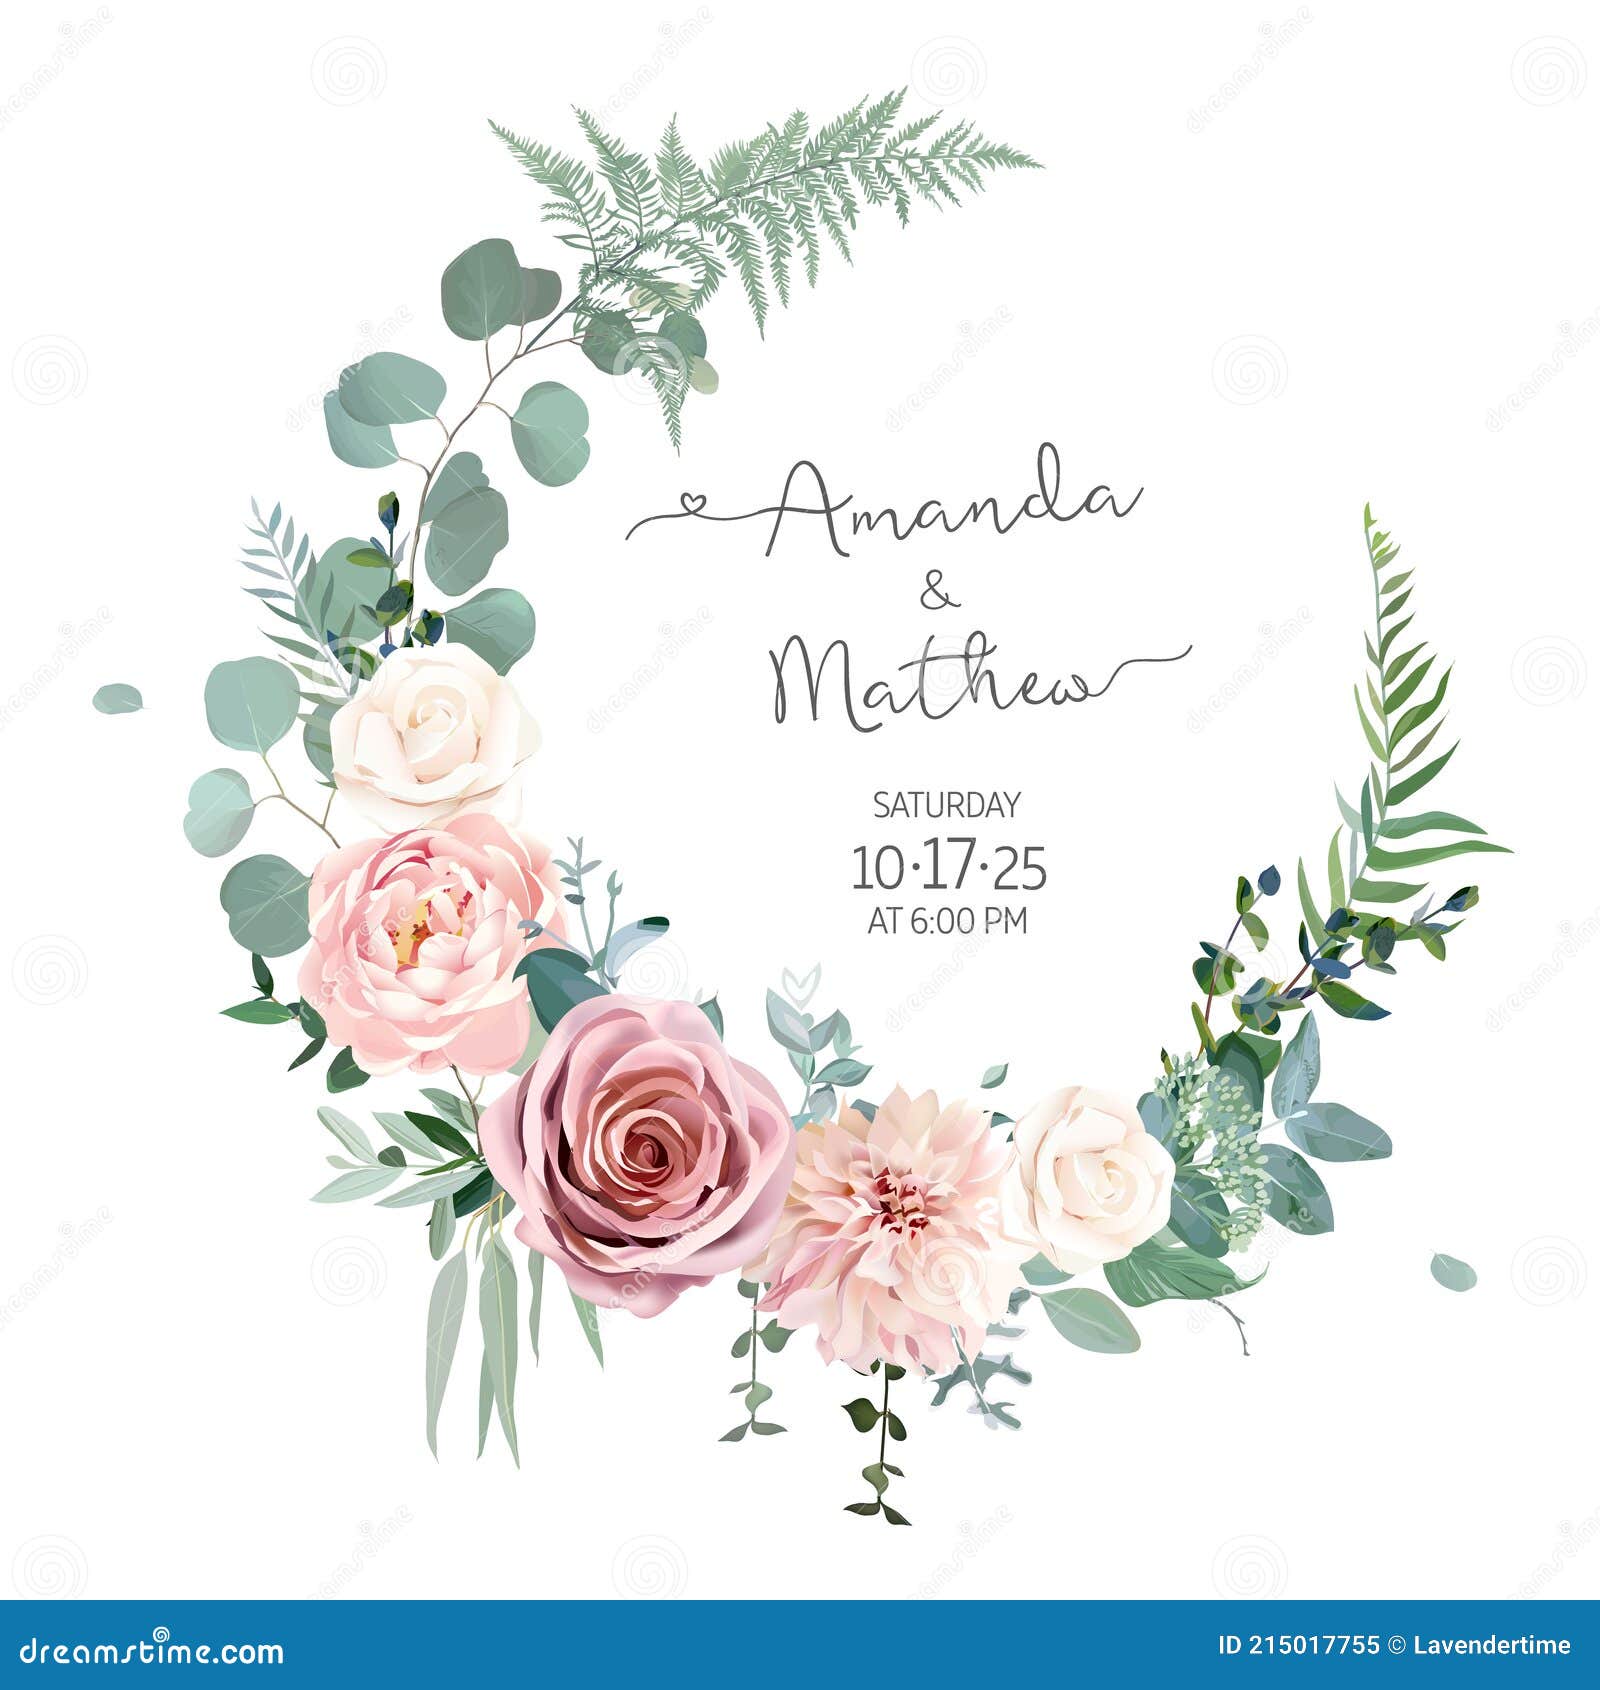 greenery, pink and white peony, rose flowers   round invitation frame